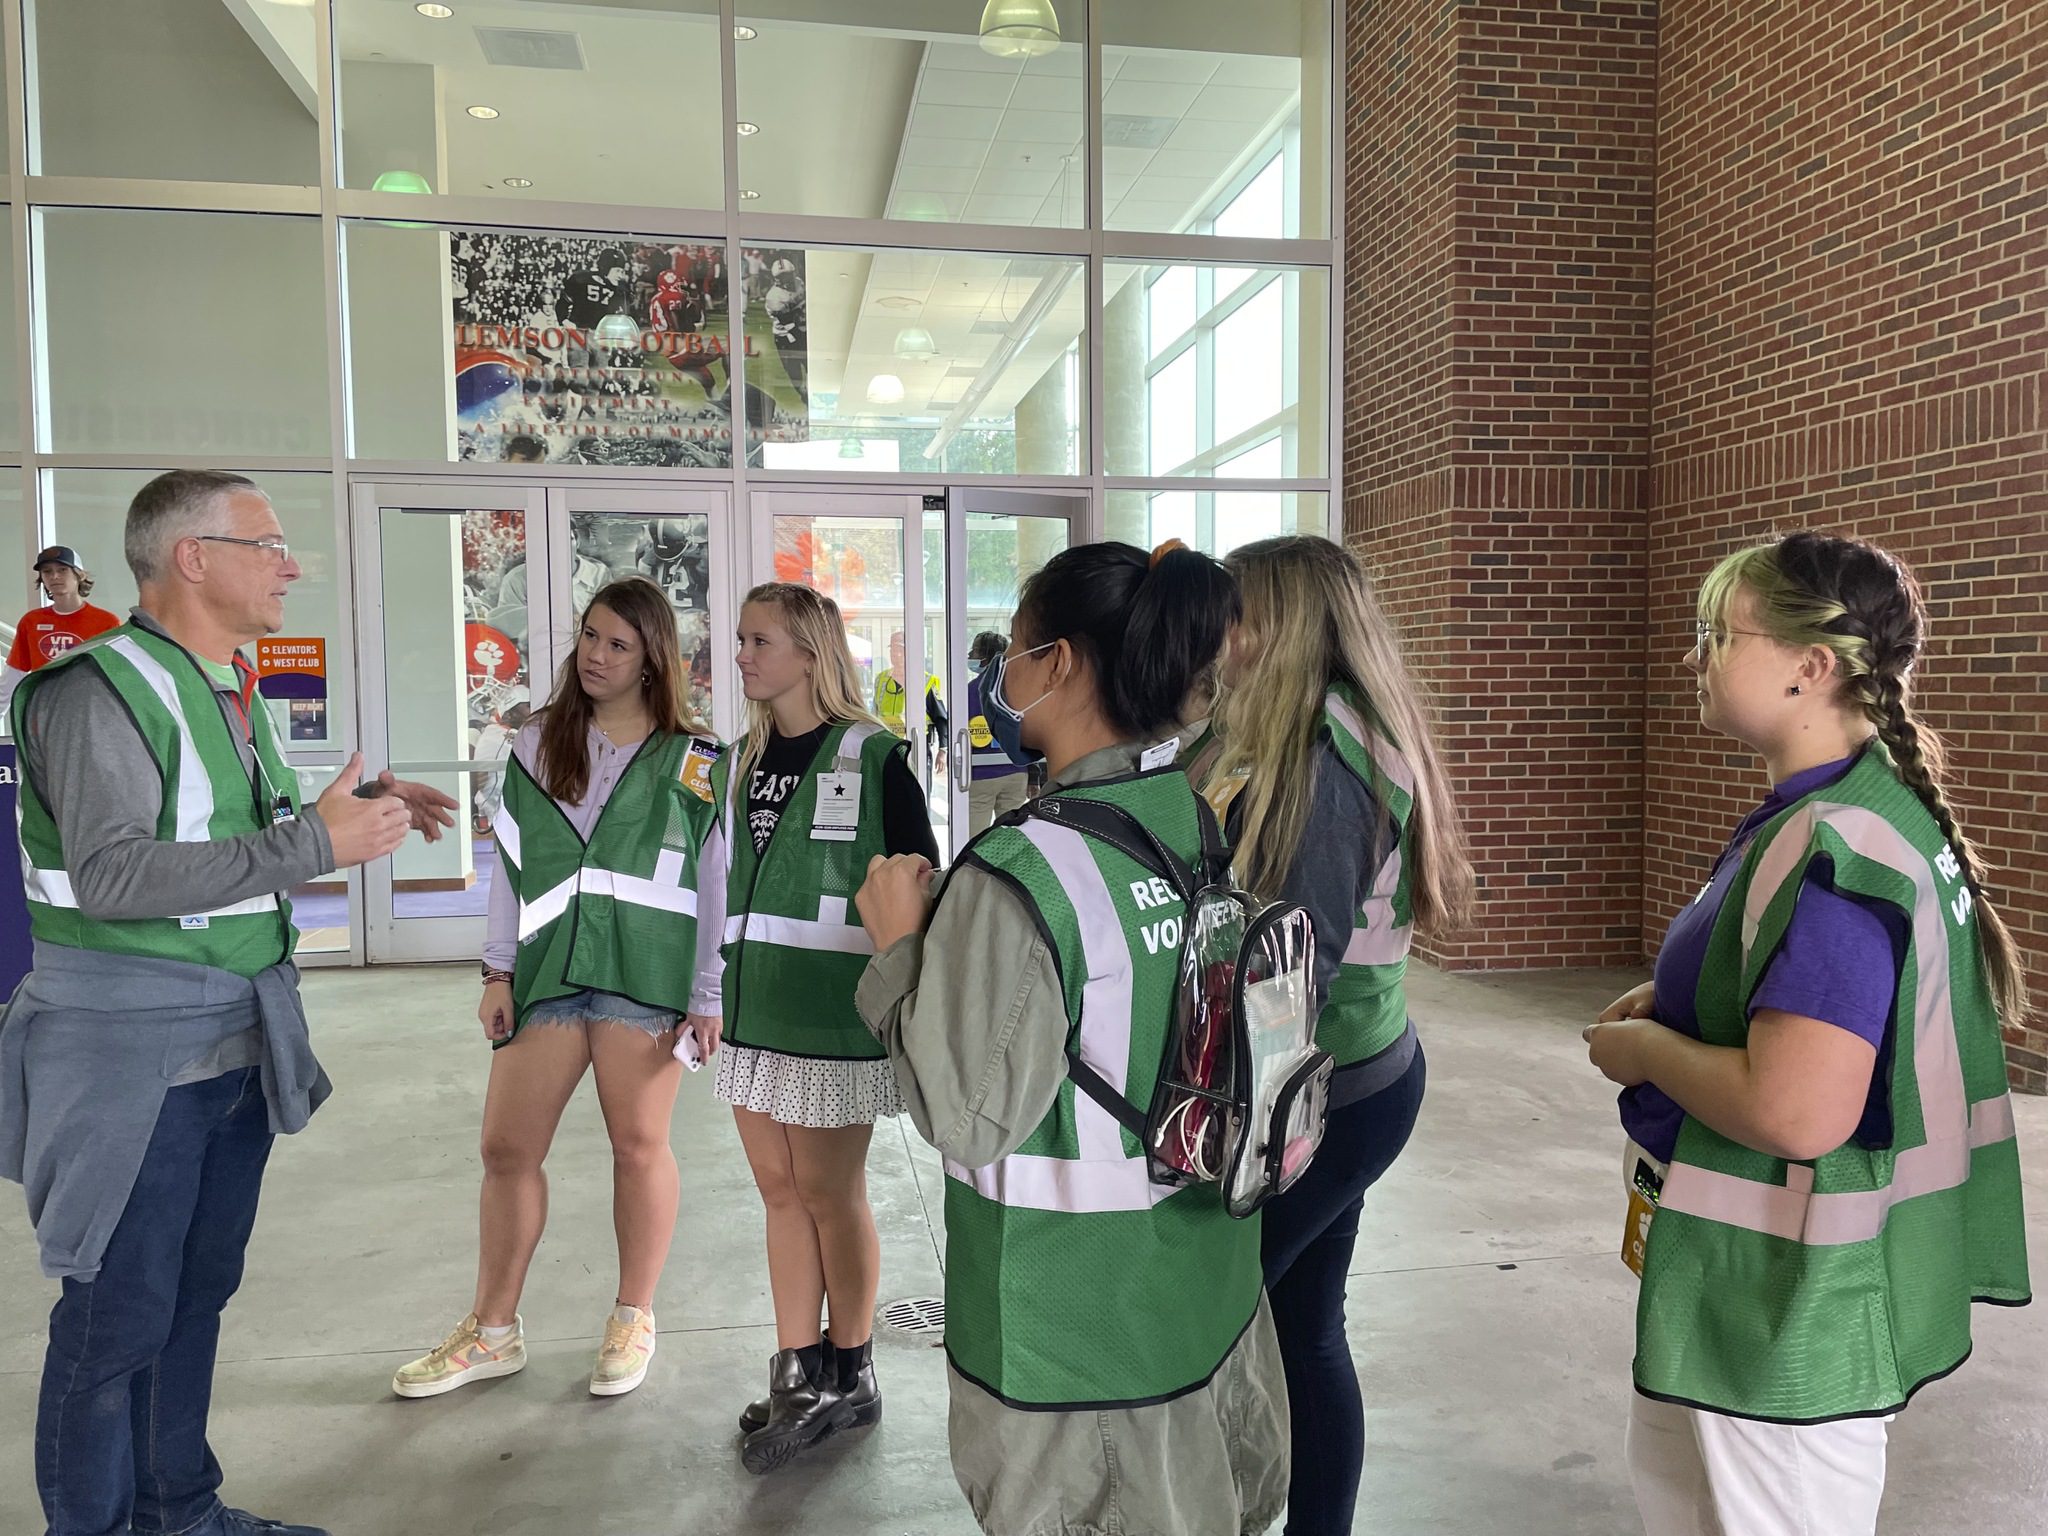 Five women in a green reflective pull over talk with a man in a green reflective pullover.